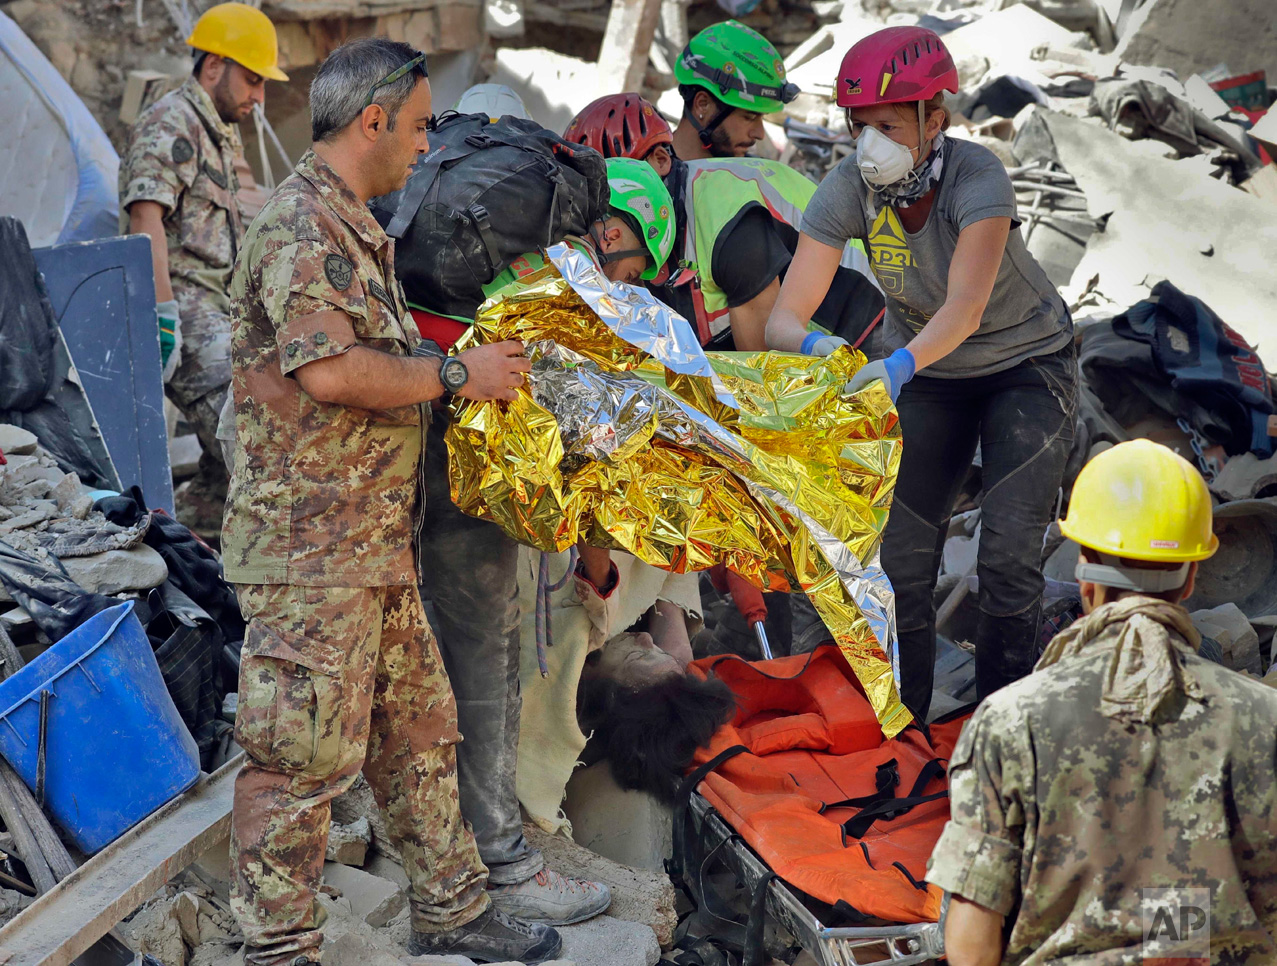  In this Wednesday, Aug. 24, 2016 photo, the body of a victim is pulled out of the rubble following an earthquake in Amatrice Italy. The magnitude 6 quake struck at 3:36 a.m. (0136 GMT) and was felt across a broad swath of central Italy, including Ro